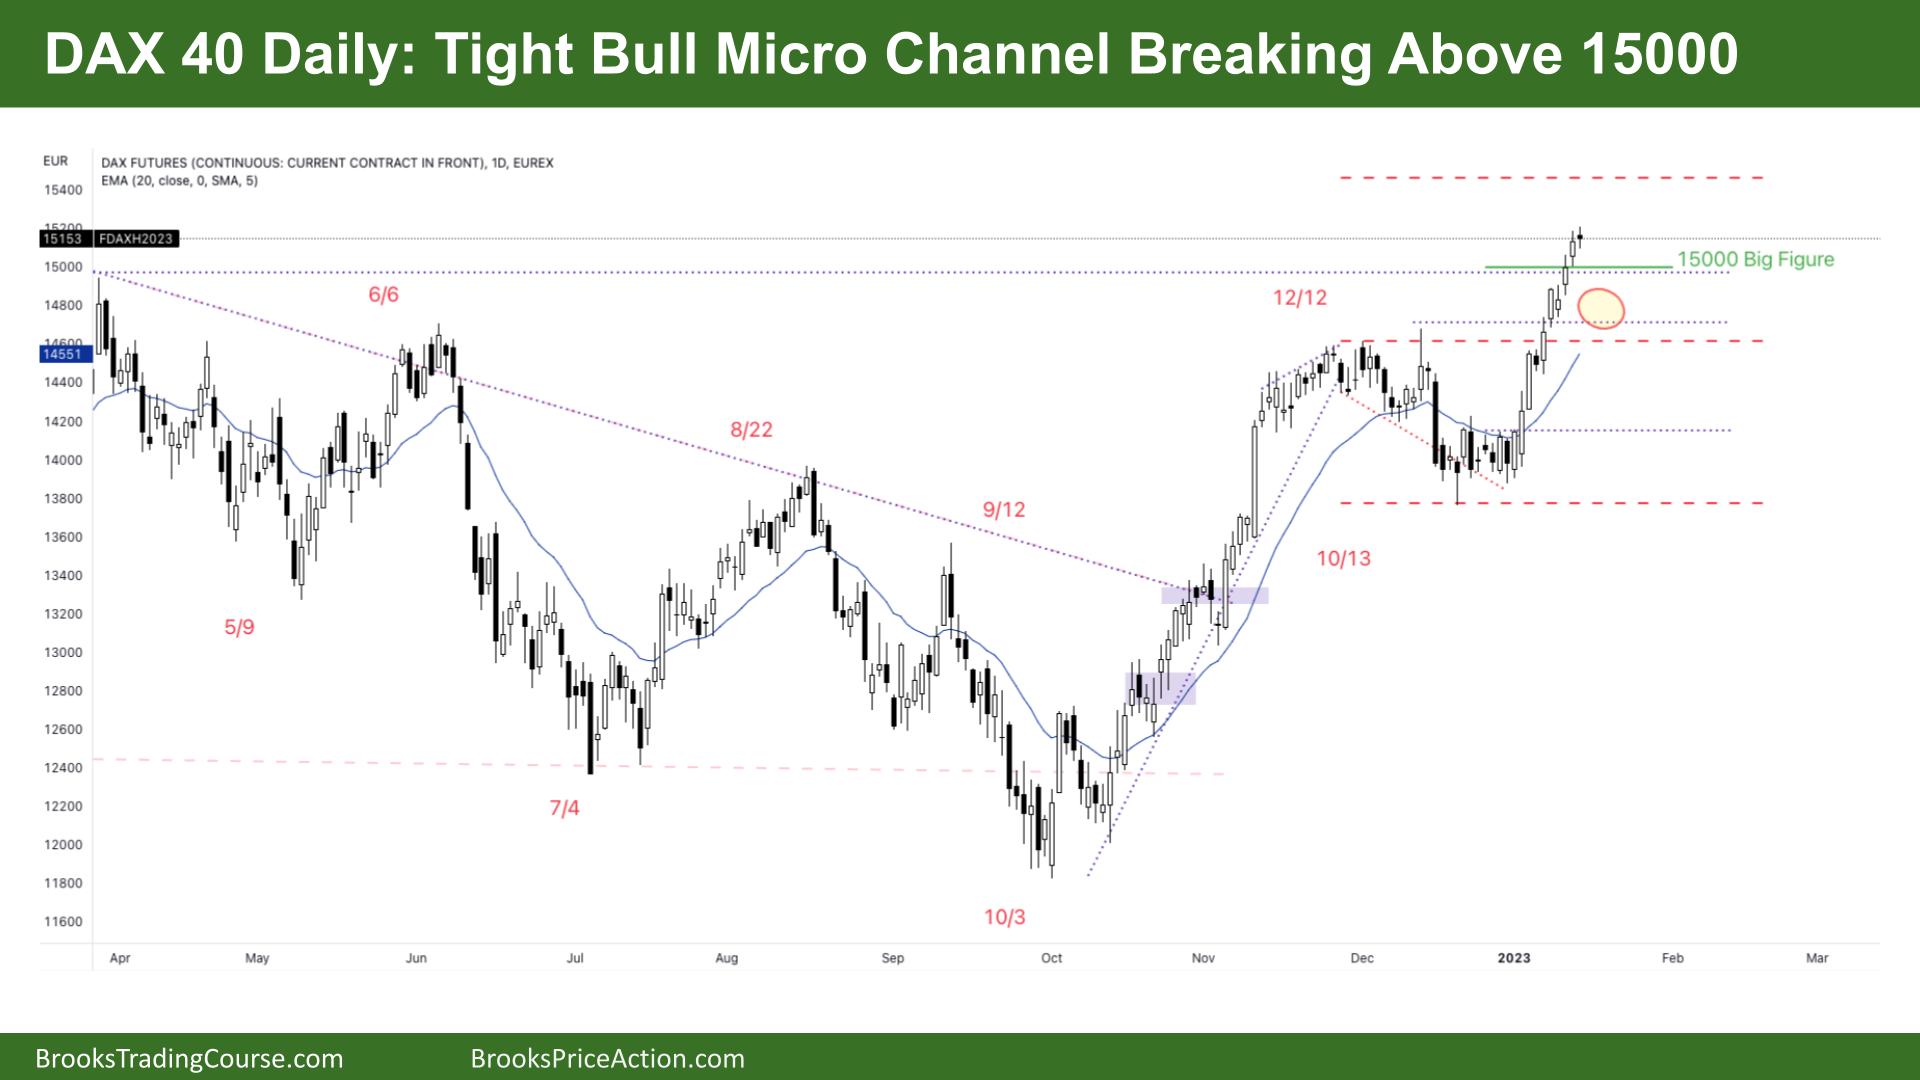 DAX 40 Tight Bull Micro Channel Breaking Above 15000